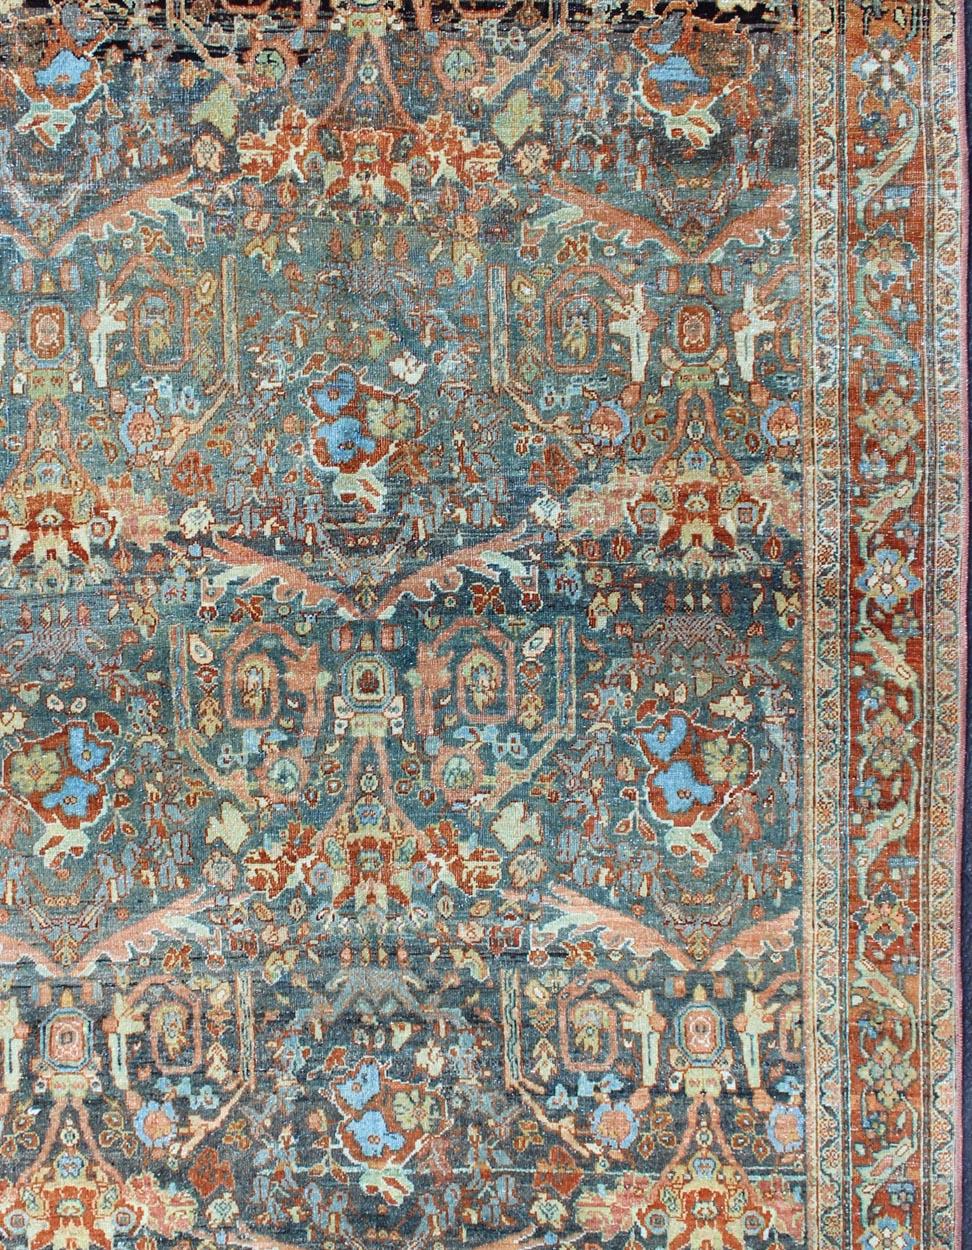 All-over design antique Persian Tabriz rug with flowing florals
Early 20th century Tabriz carpet with all-over flower design, rug SUS-1909-434, country of origin / type: Iran / Tabriz, circa 1910

This antique Tabriz carpet from 1910s Persia